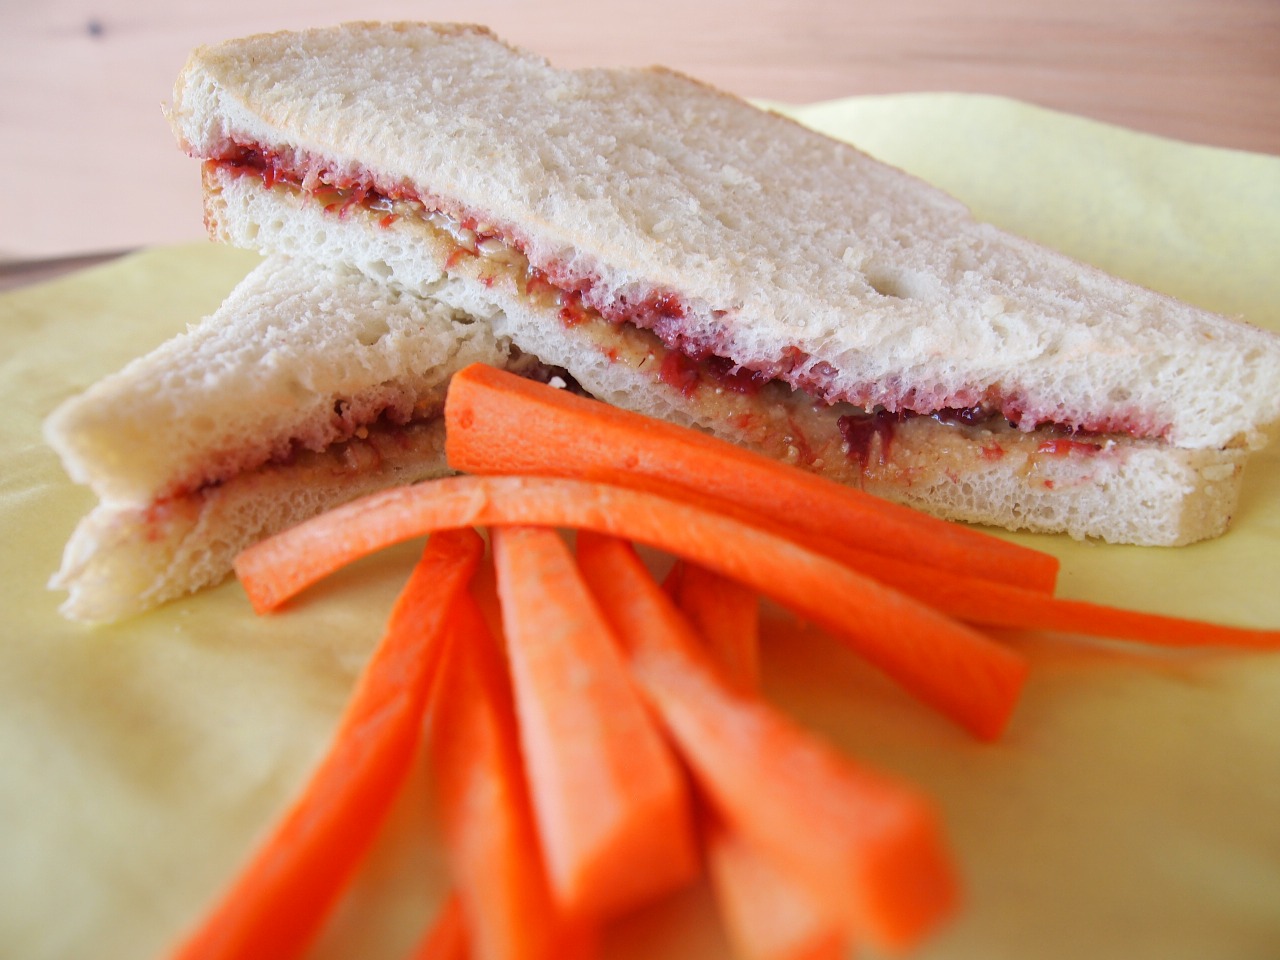 peanut butter jelly sandwhich on a table with carrots